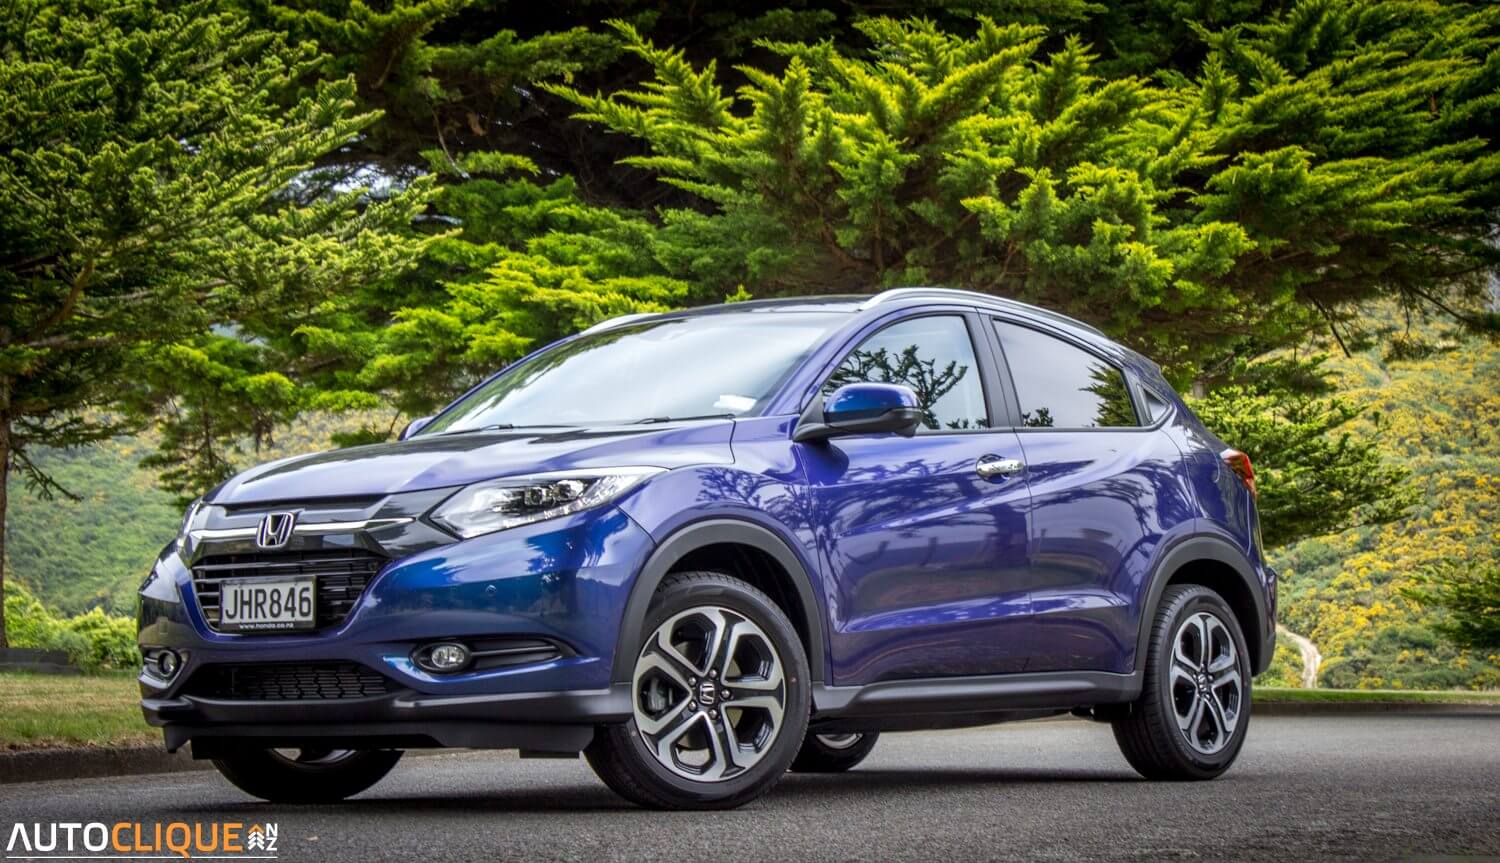 16 Honda Hr V Car Review The Cx3 Challenger Has Arrived Drivelife